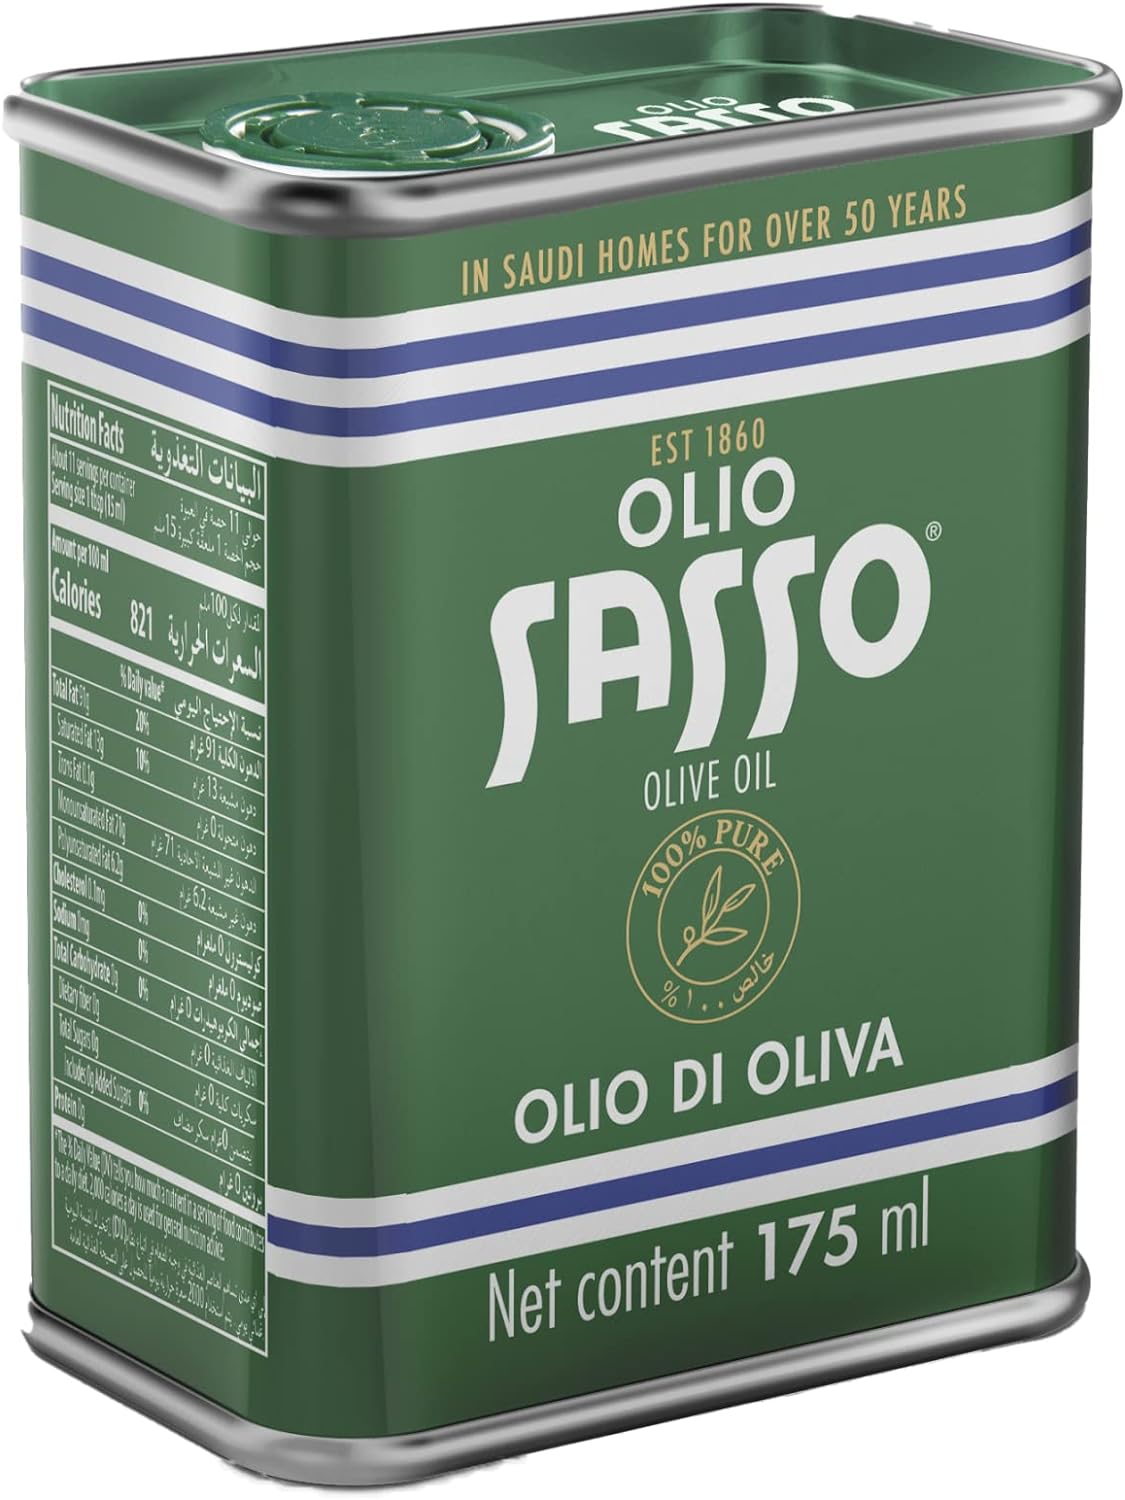 Sasso Pure Olive Oil, 175 Ml - Pack Of 1